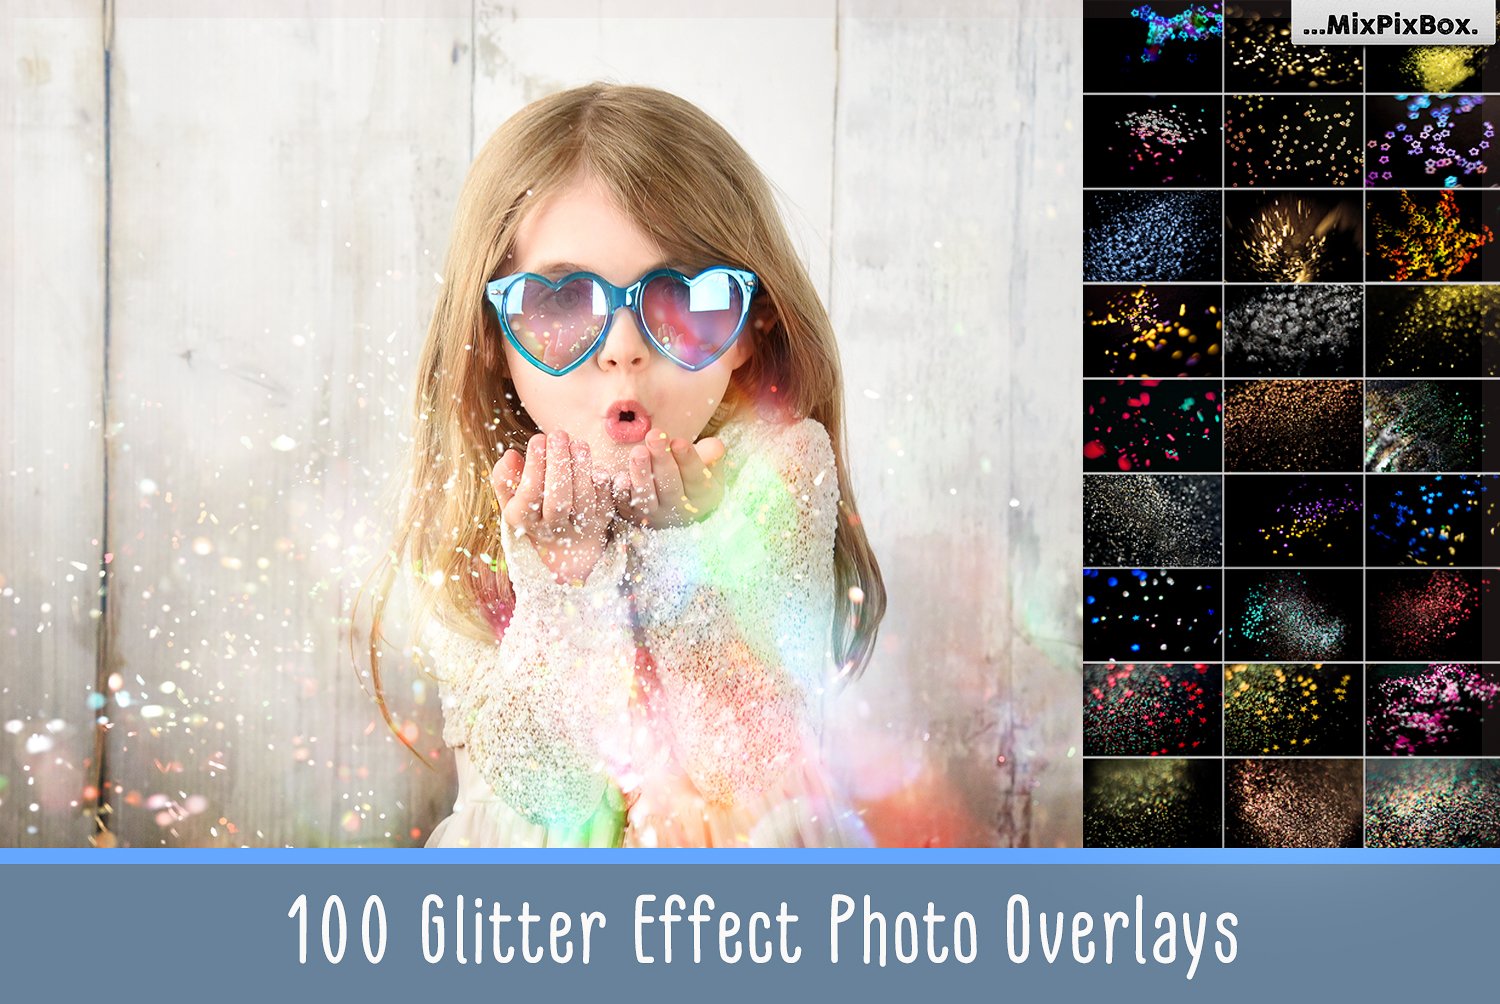 Glitter Effect Photo Overlayscover image.